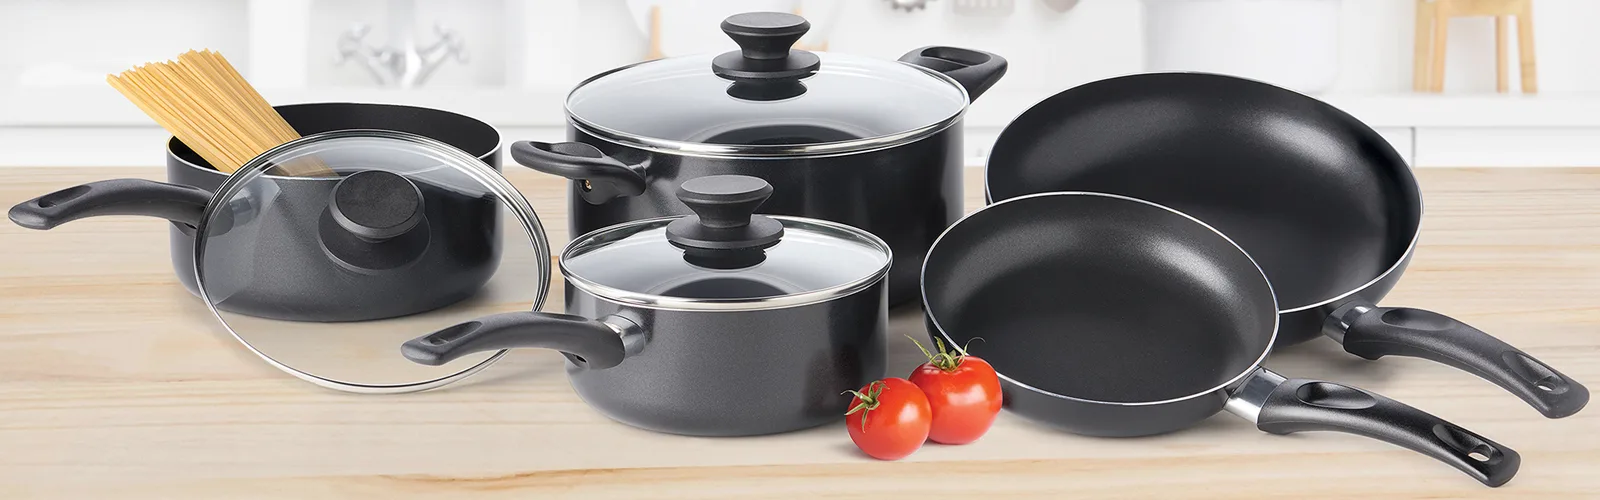 How to Pick the Right Pan: Best Cooking Equipment